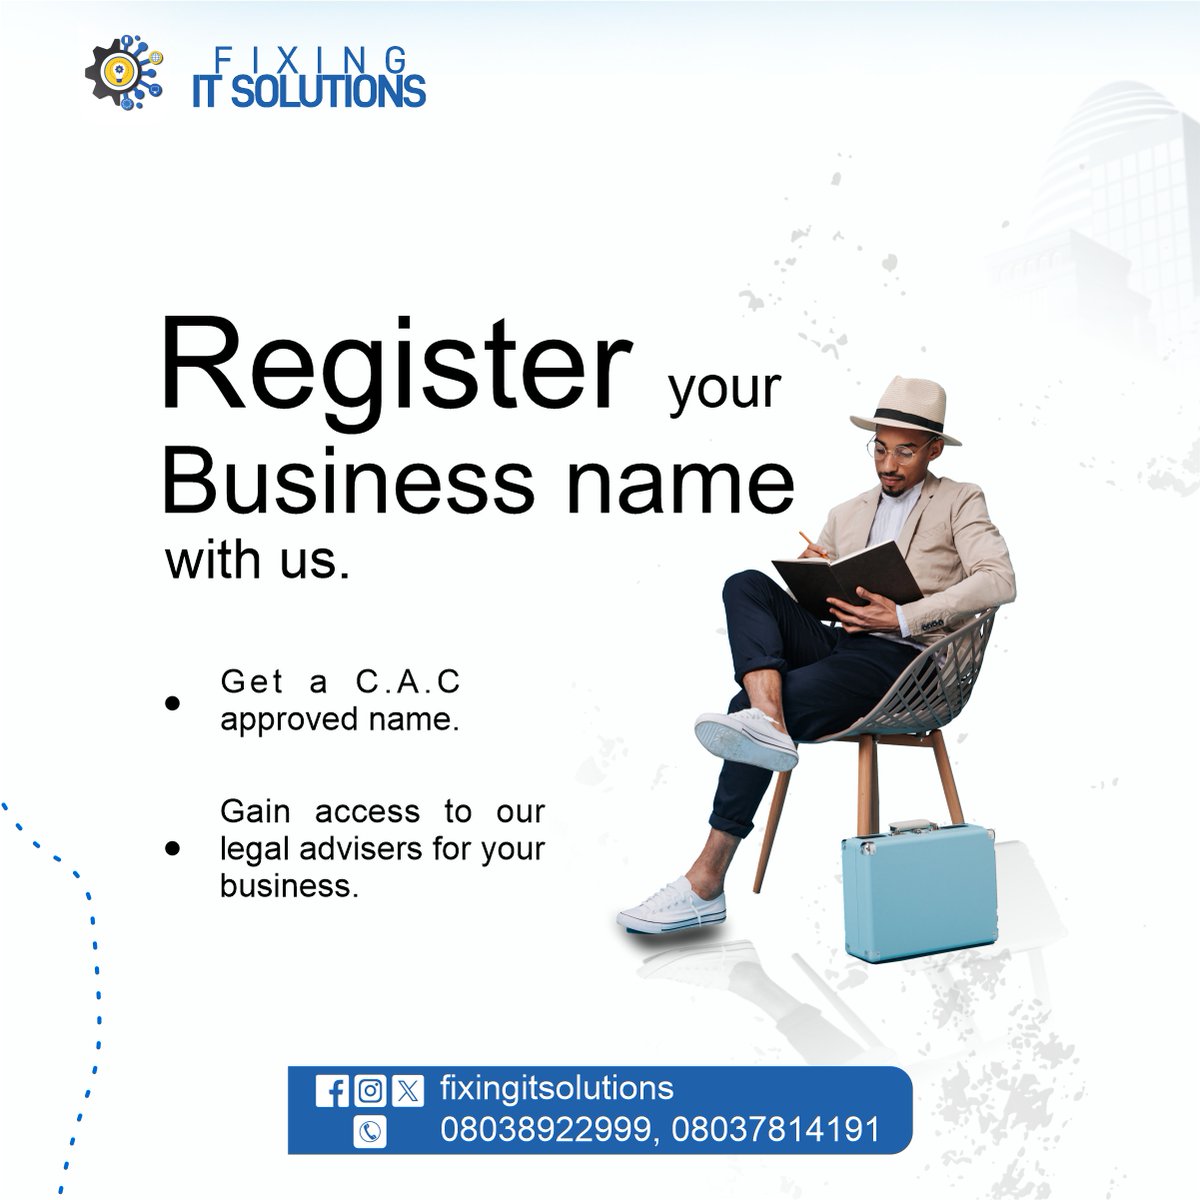 You like the business name or use it doesn't make it yours.
Register with us today to get your own CAC approved business name.

#fixingitsolutions #businessname #cac